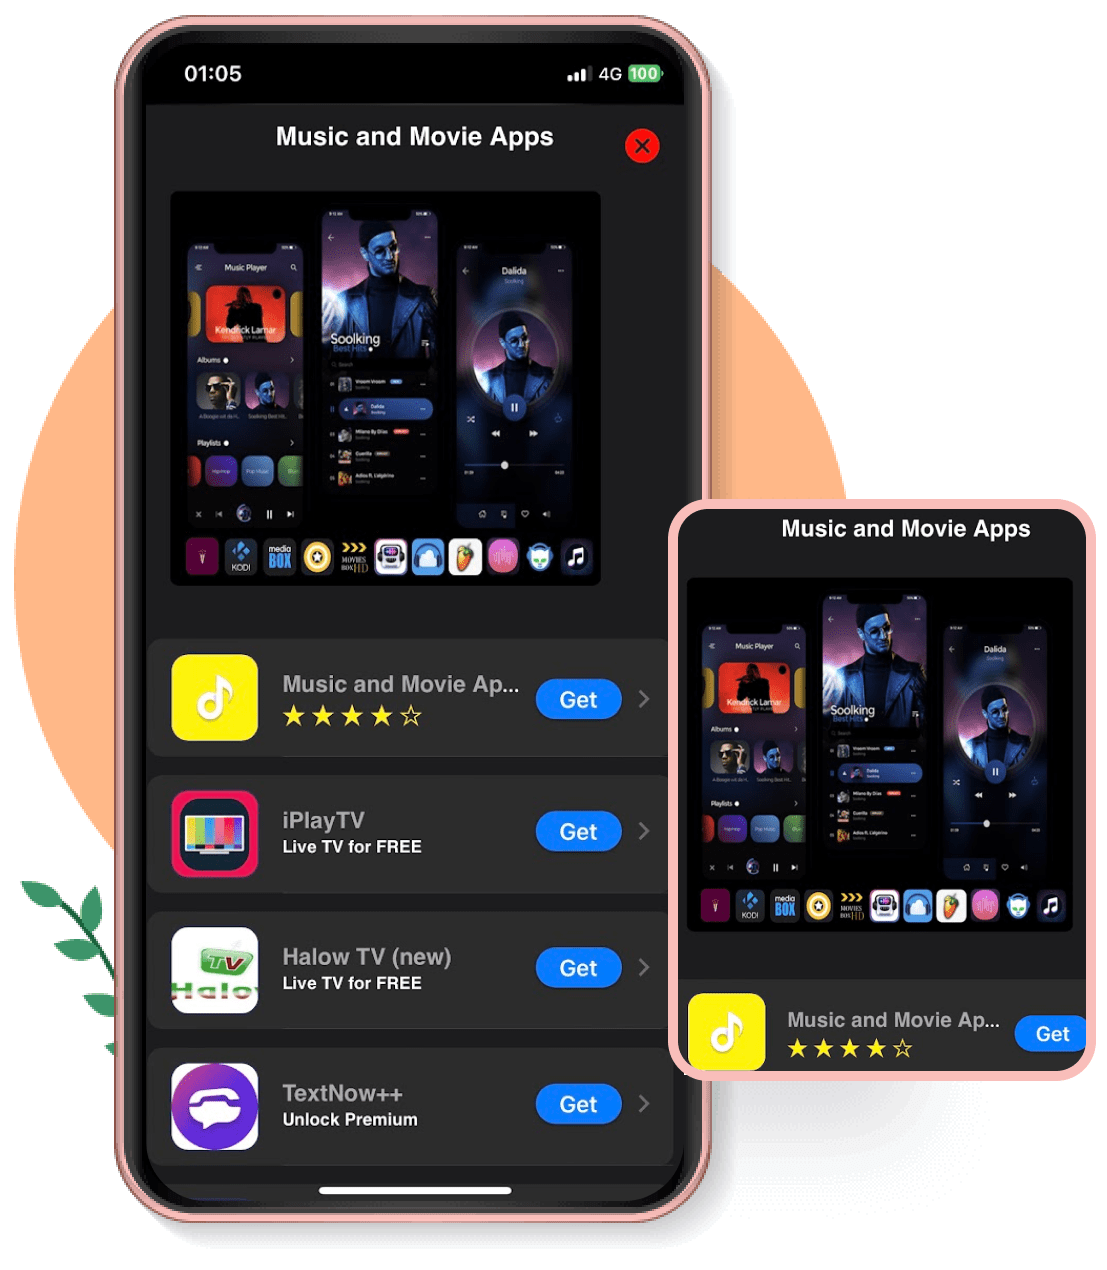 Music and Movie Apps